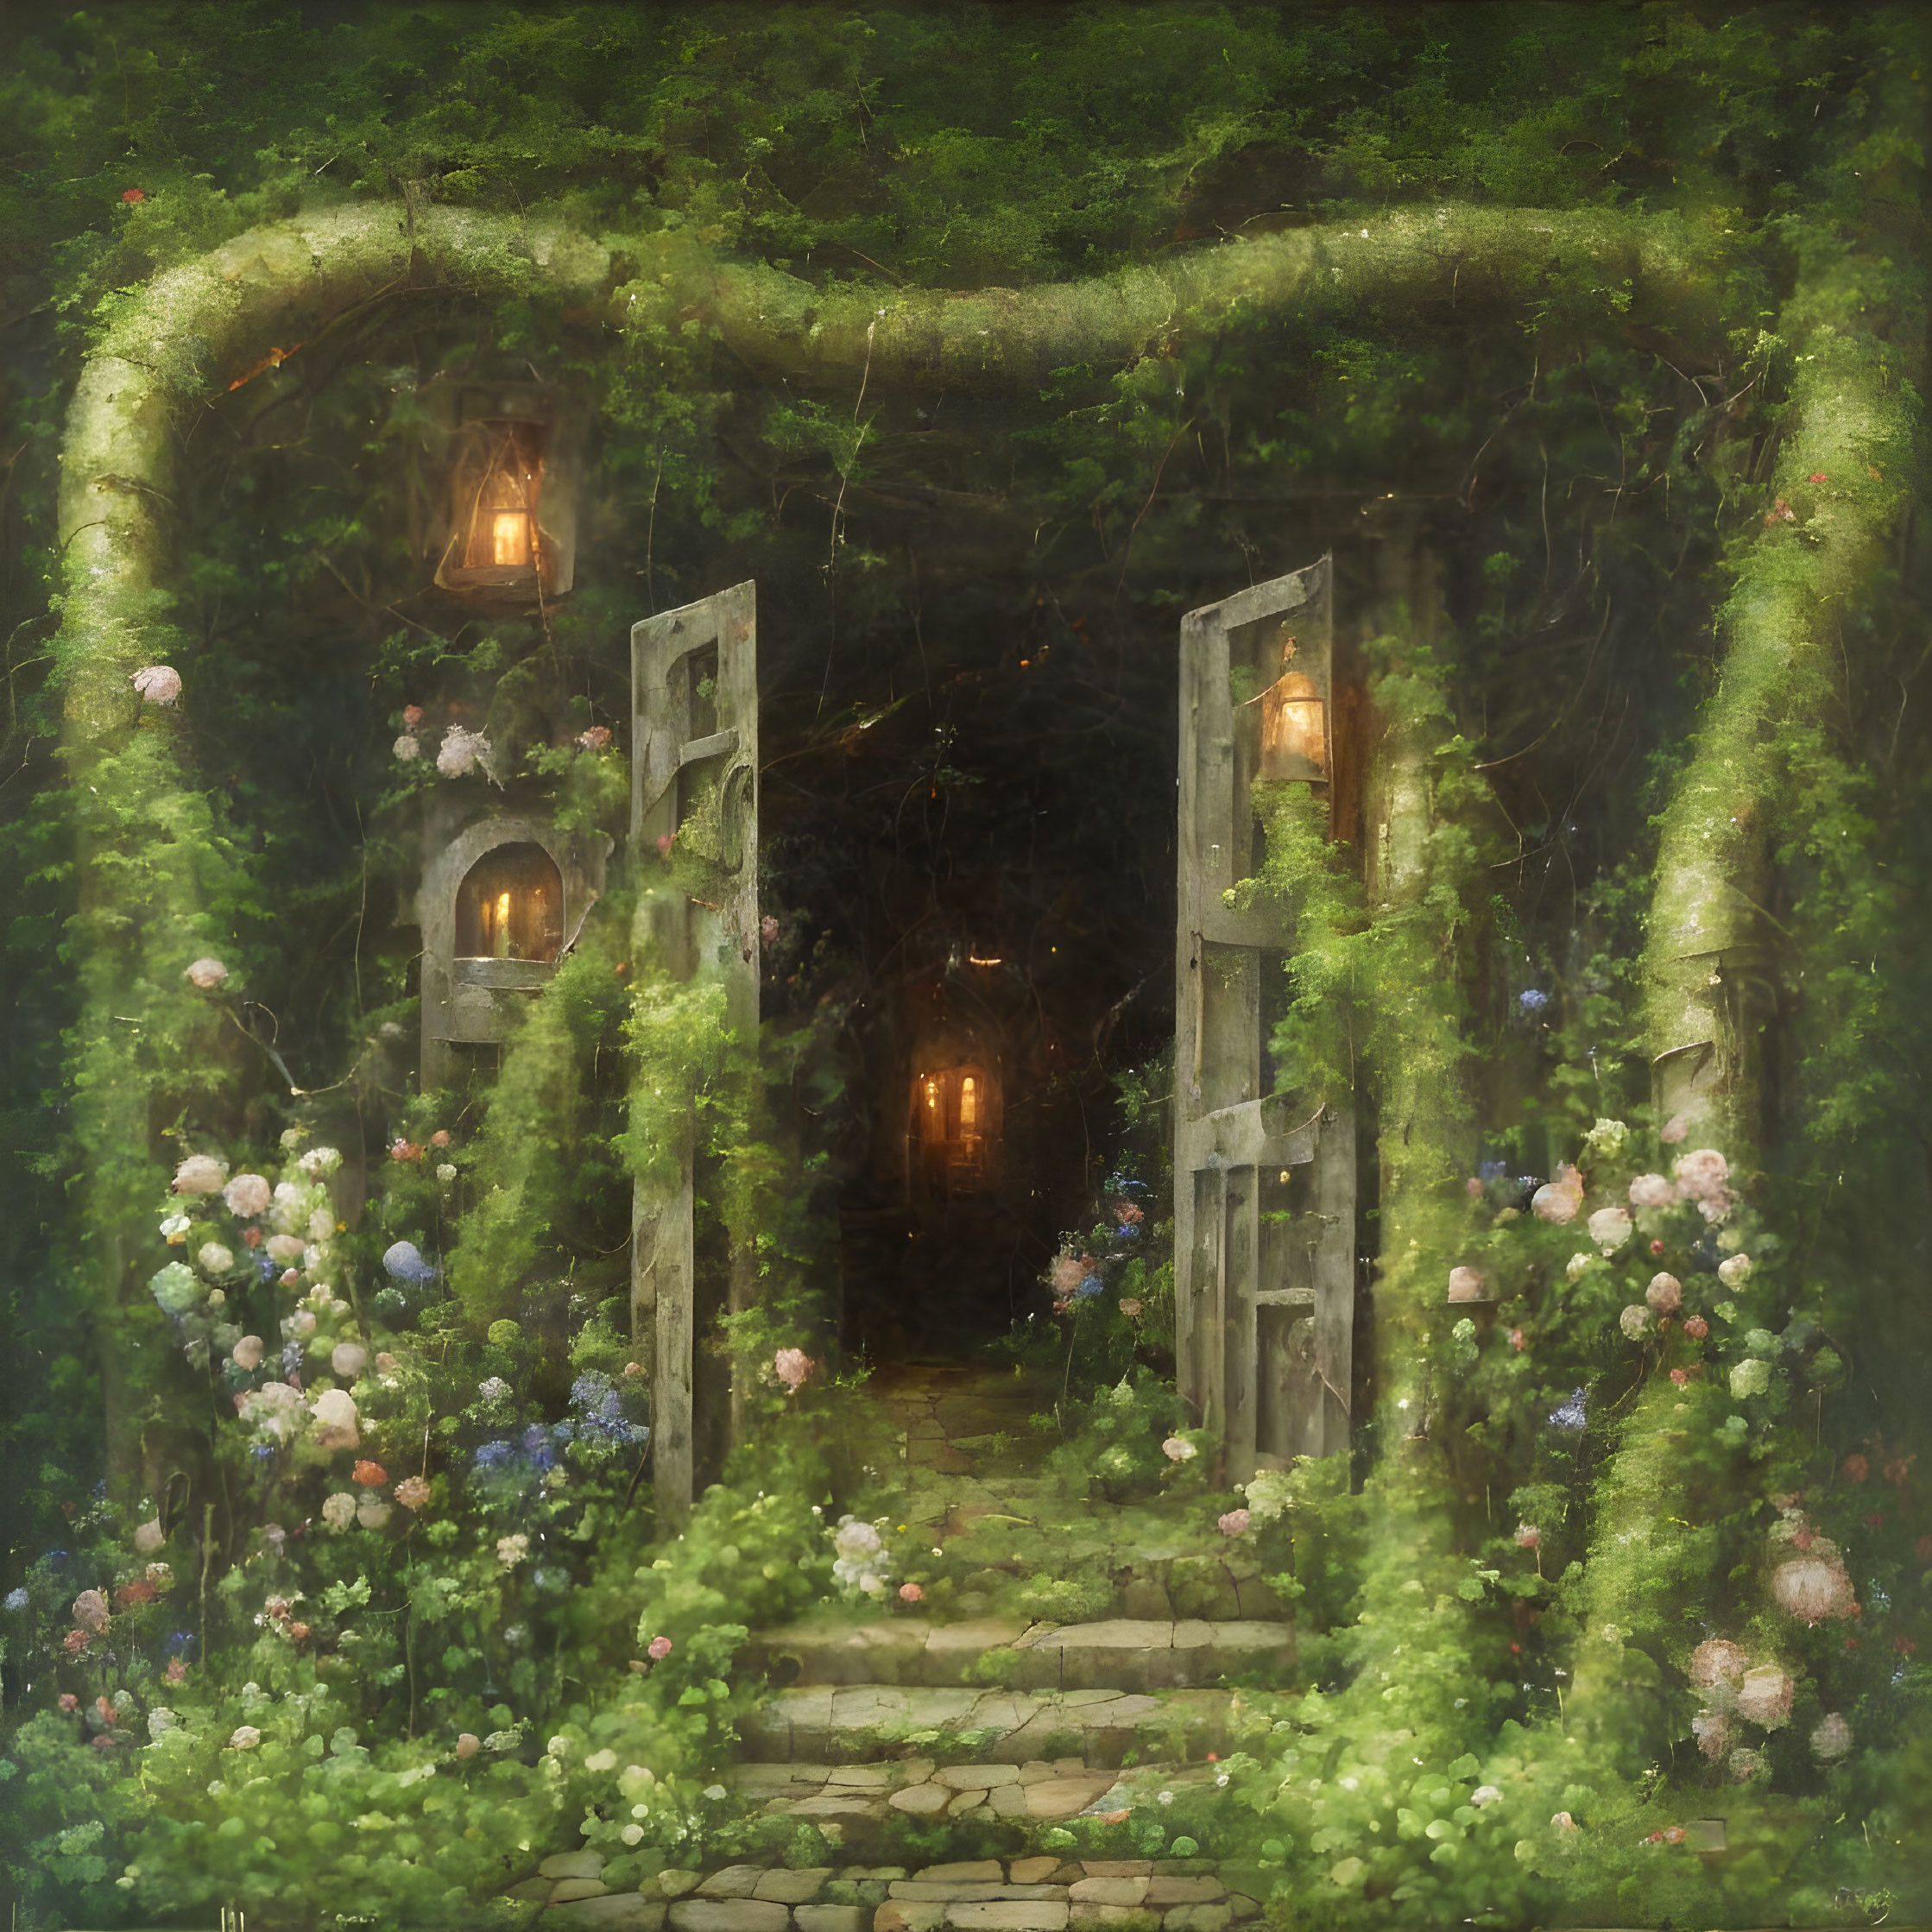 Overgrown greenery and colorful flowers frame a doorway to a warmly lit tunnel